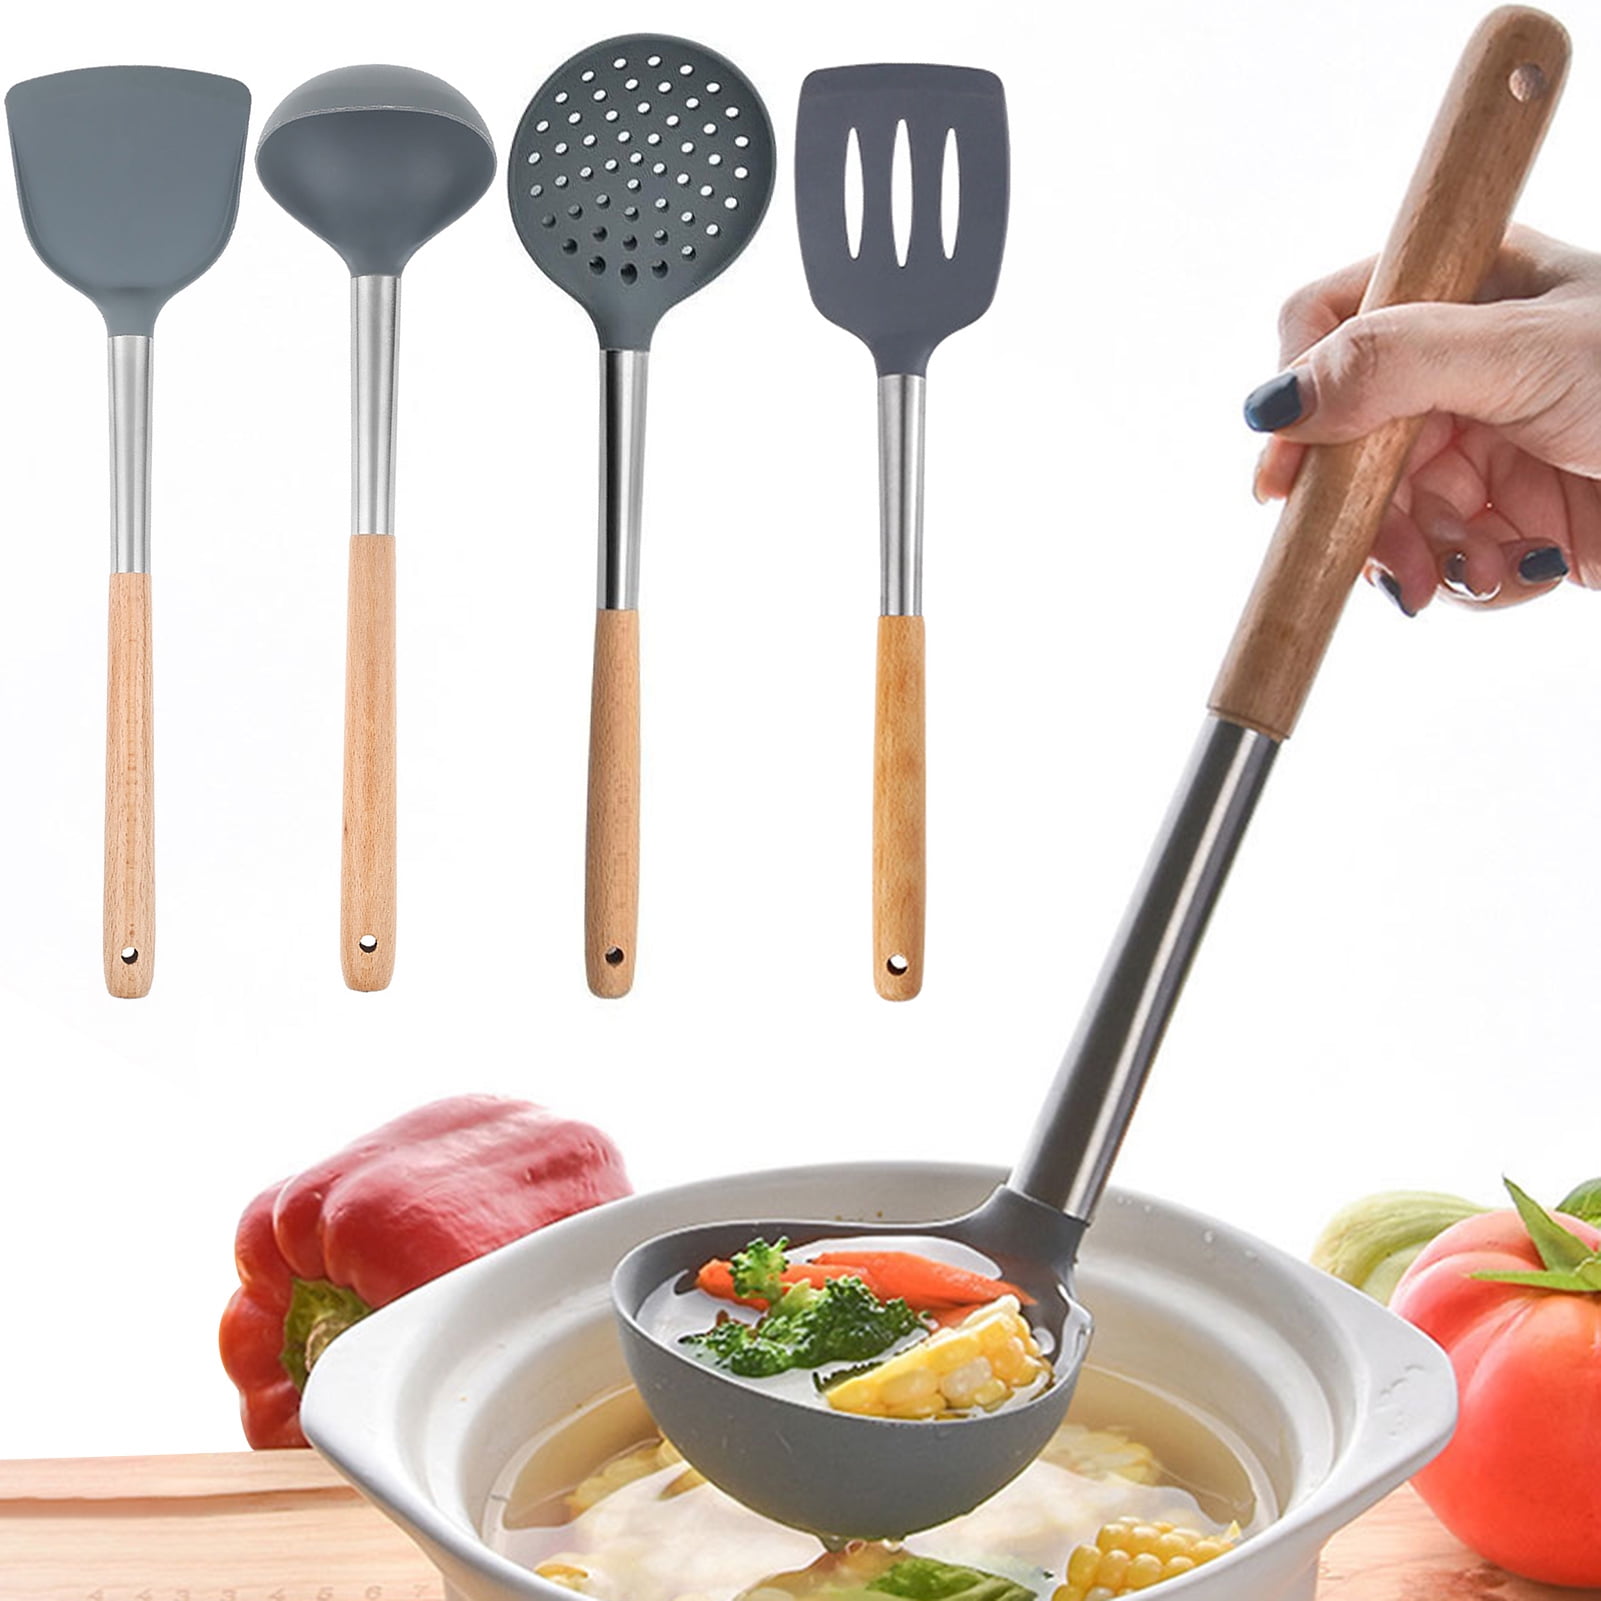 Tinker Kitchen Wooden Cooking Utensils, Spoons Spatula Shovel, Kitchen Cooking Tools, for Nonstick Cookware and Wok, for Stirring, Baking, Size: Thin